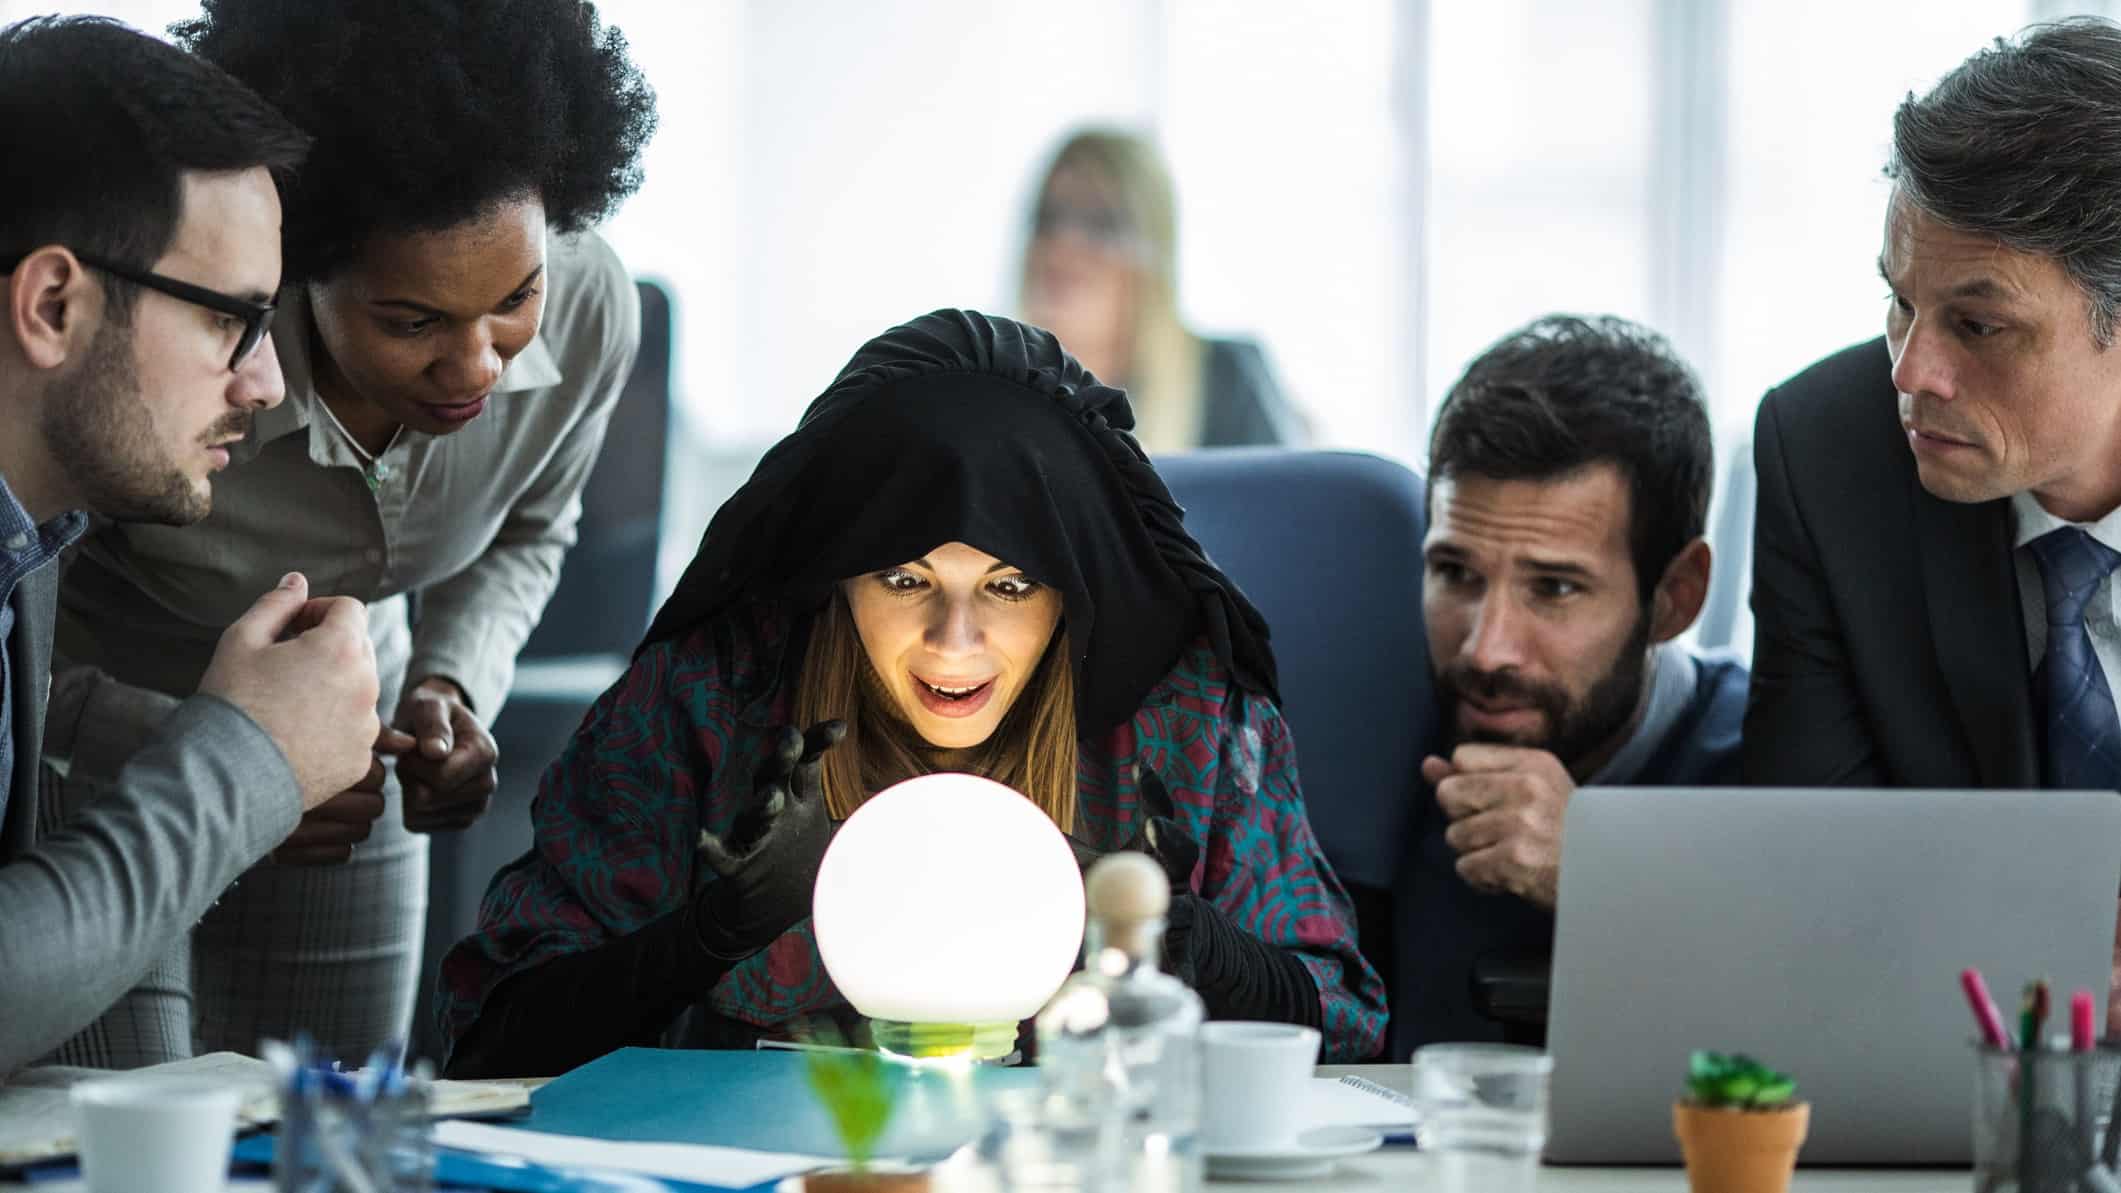 A fortune teller looks into a crystal ball in an office surrounded by business people.